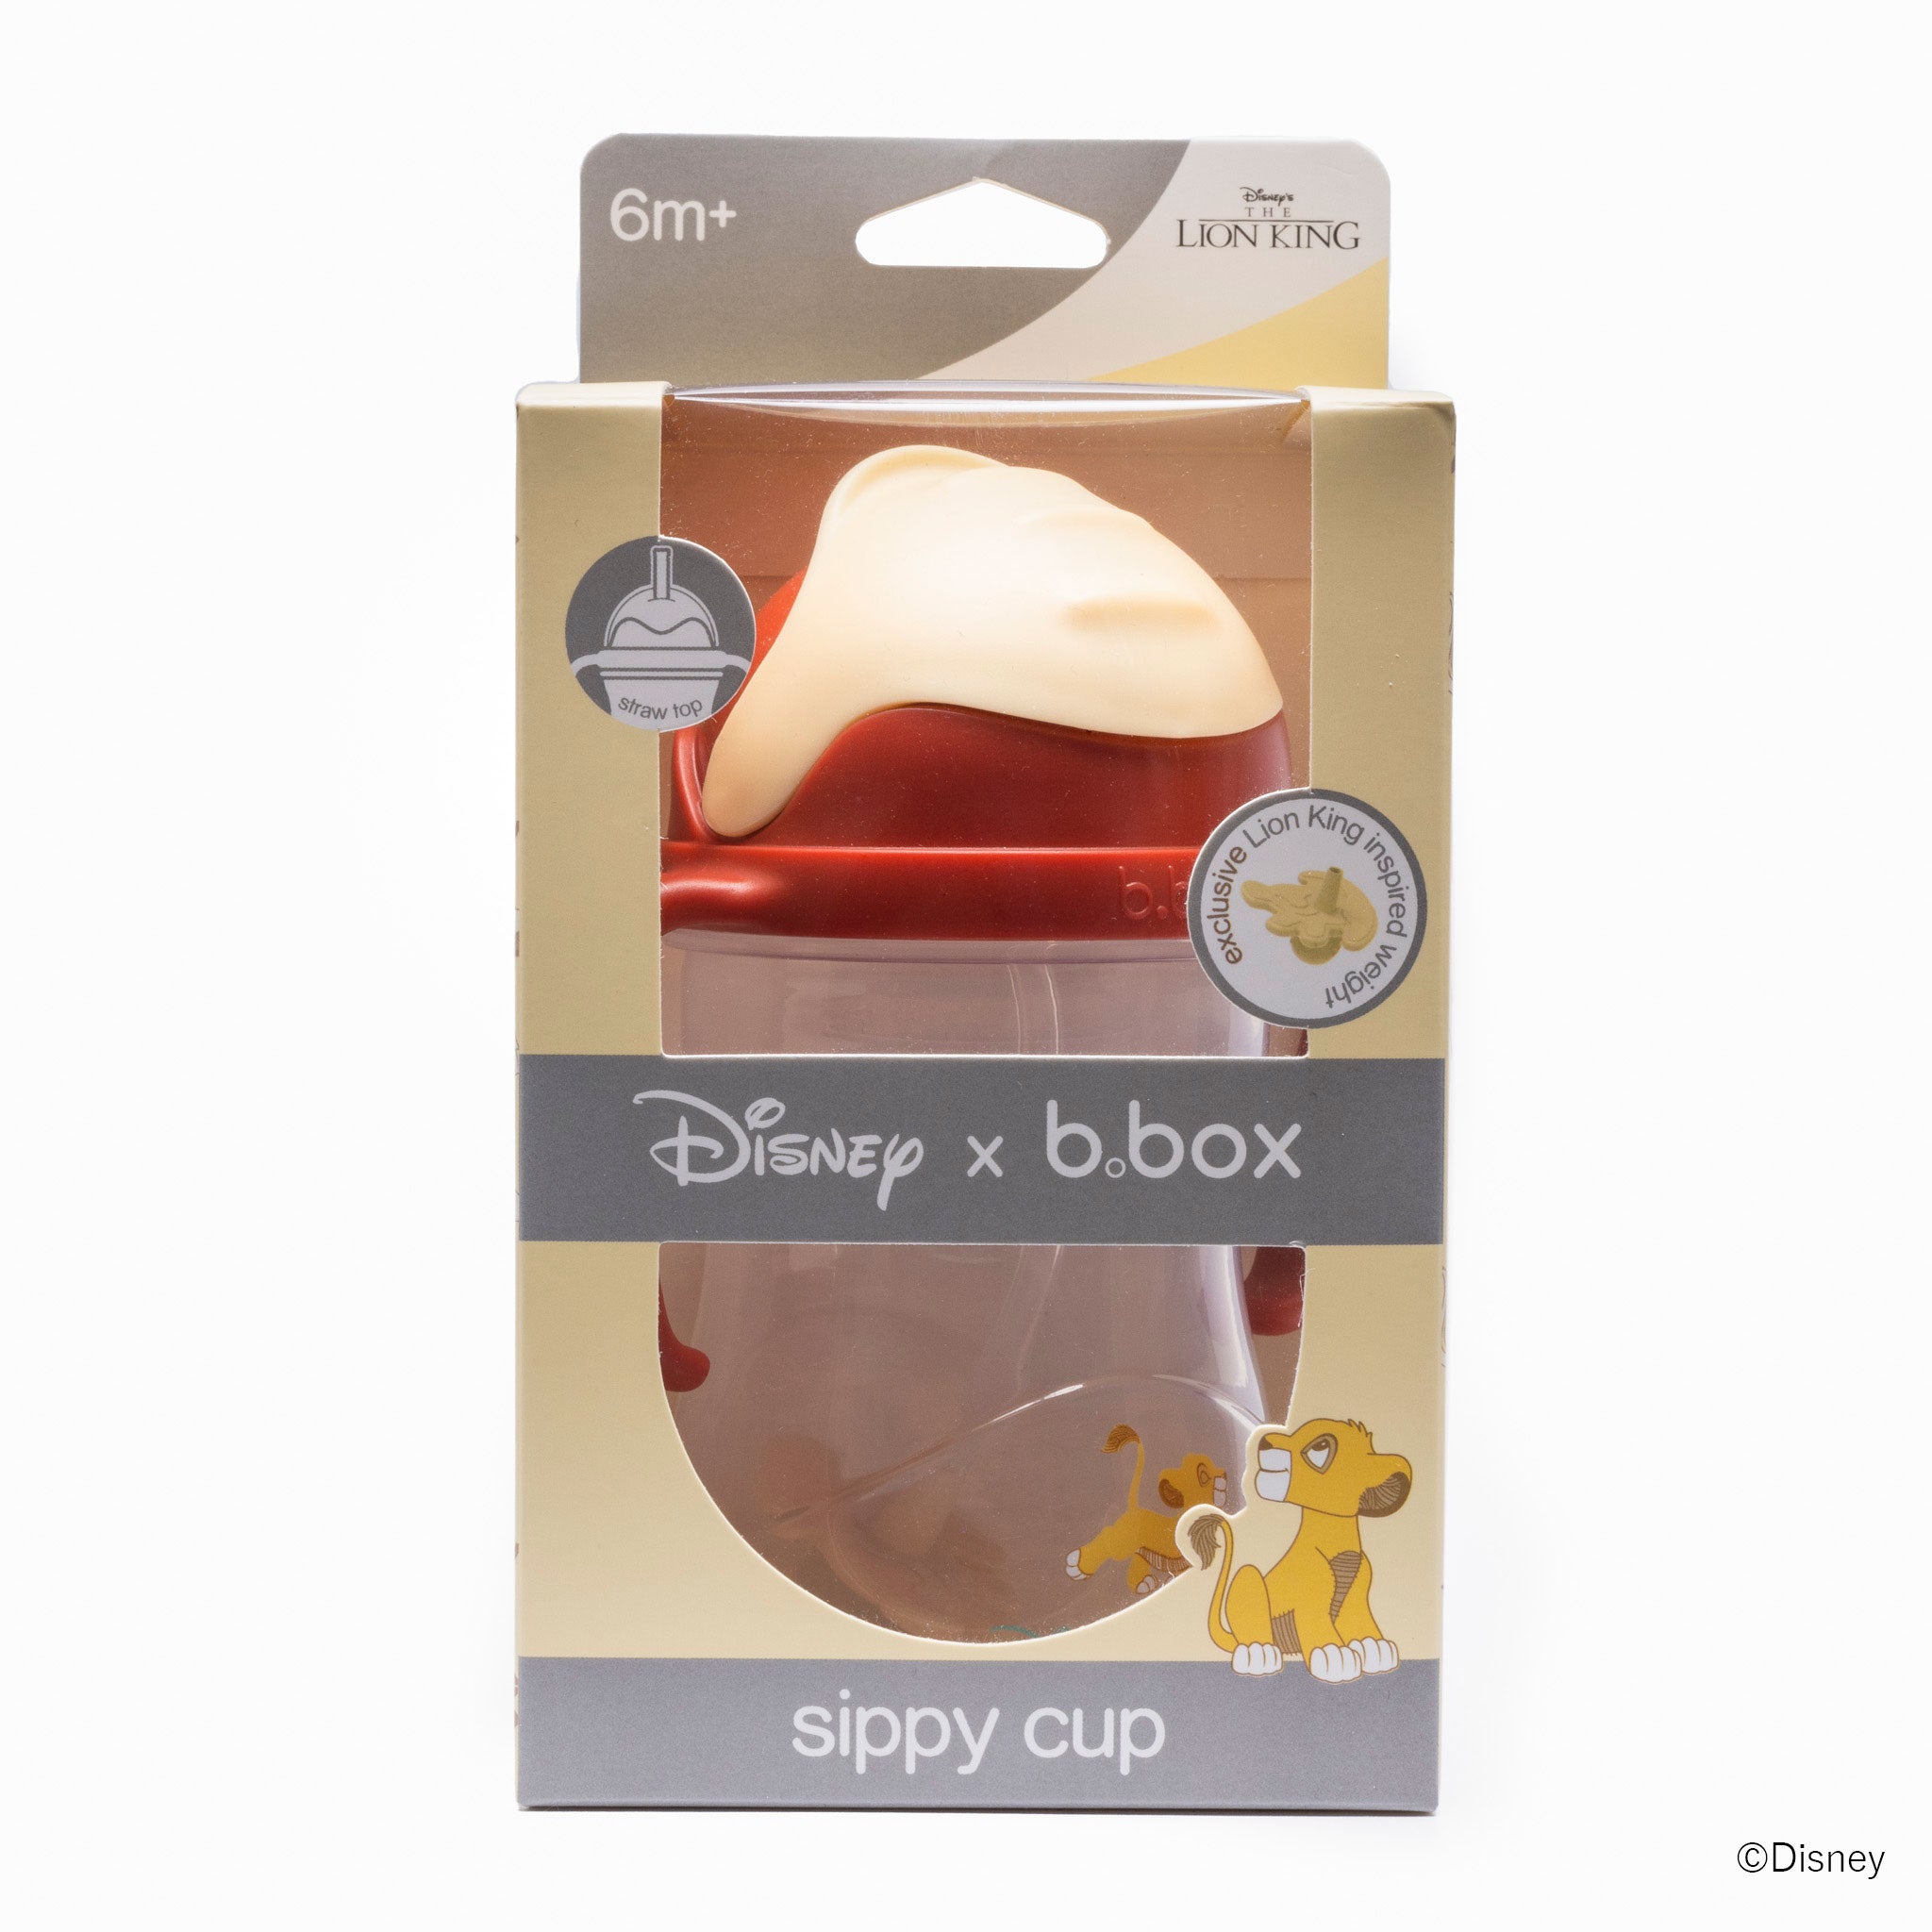 *b.box* Sippy cup ストローマグ シッピーカップ  - Lion King